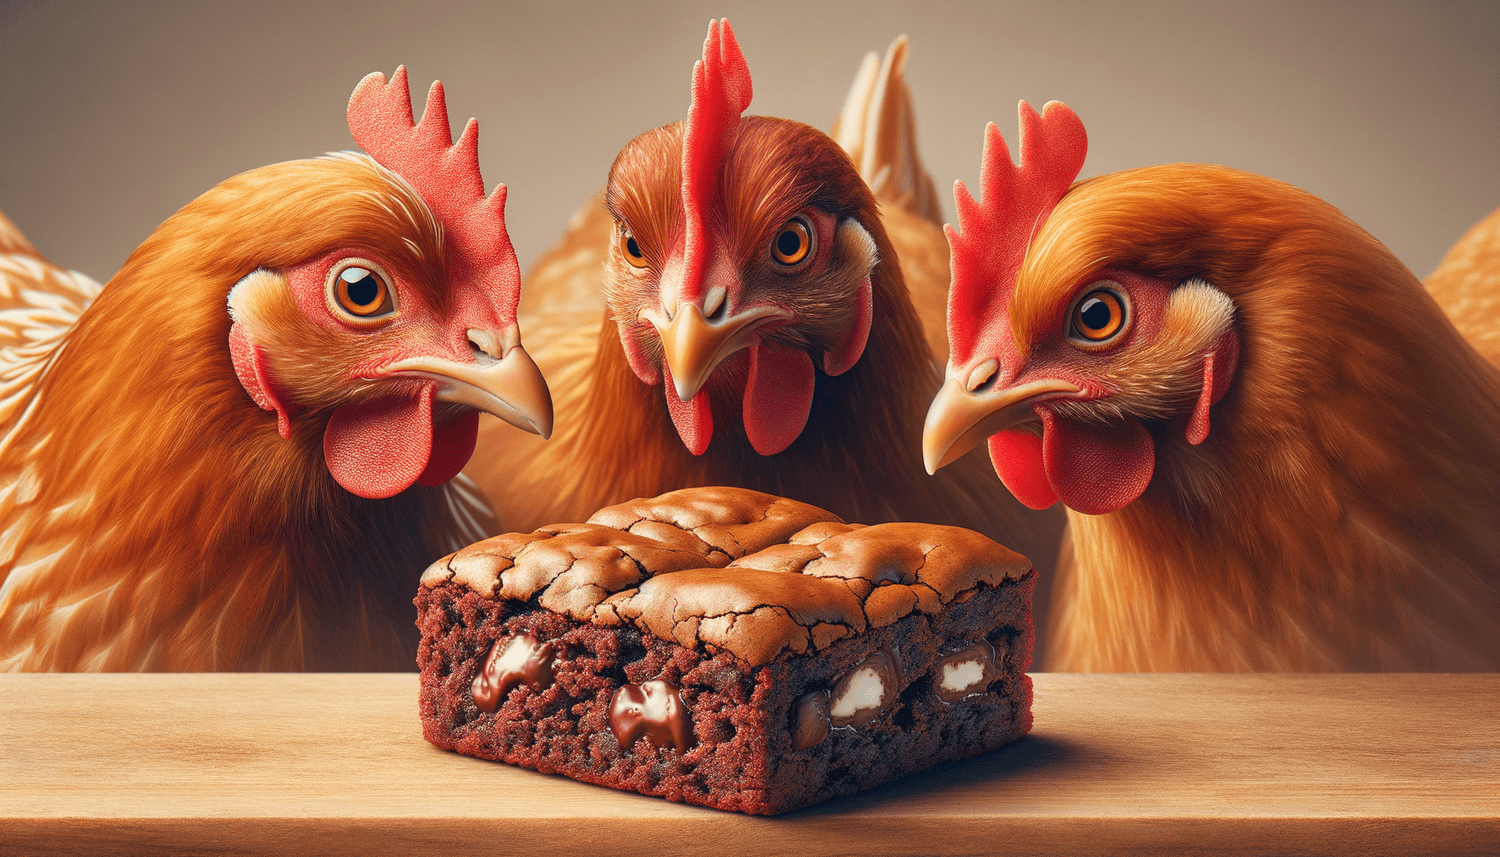 Can Chickens Eat Brownies?